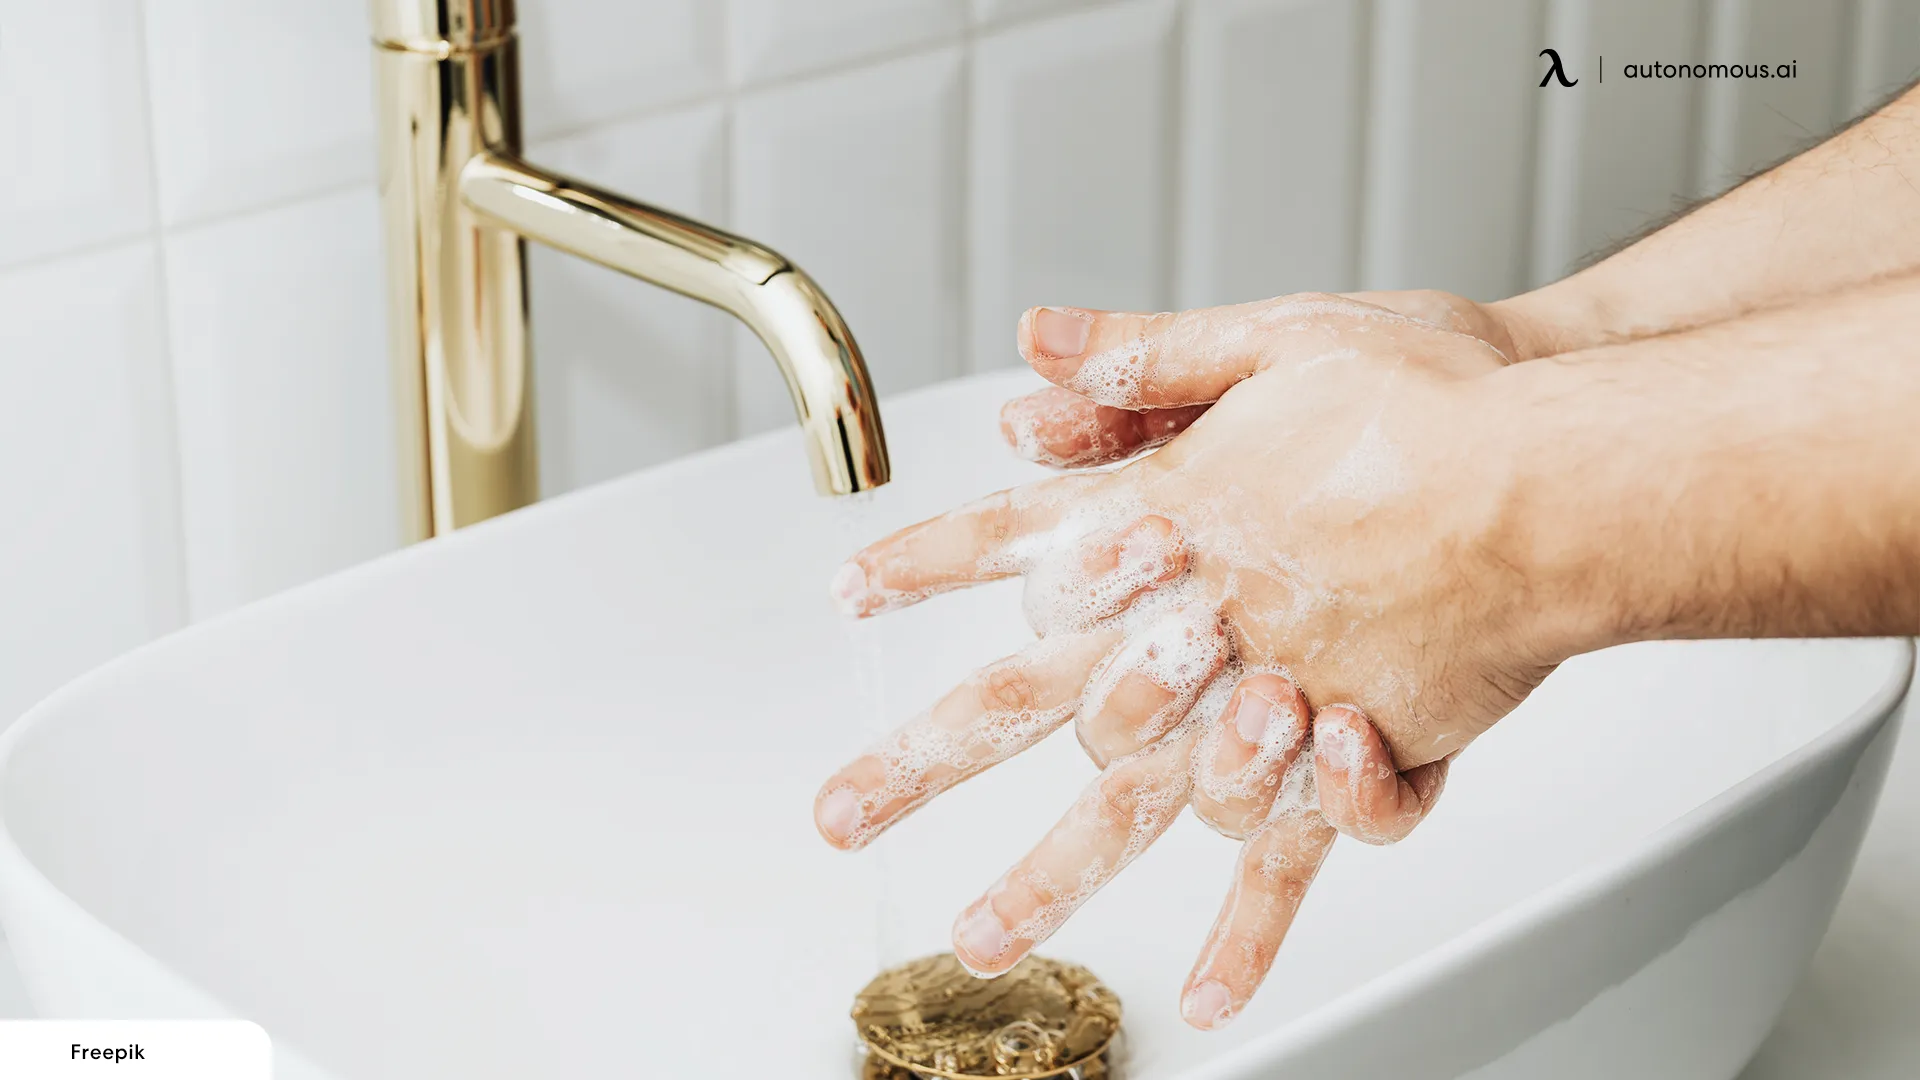 Here is How You Can Properly Wash Your Hands